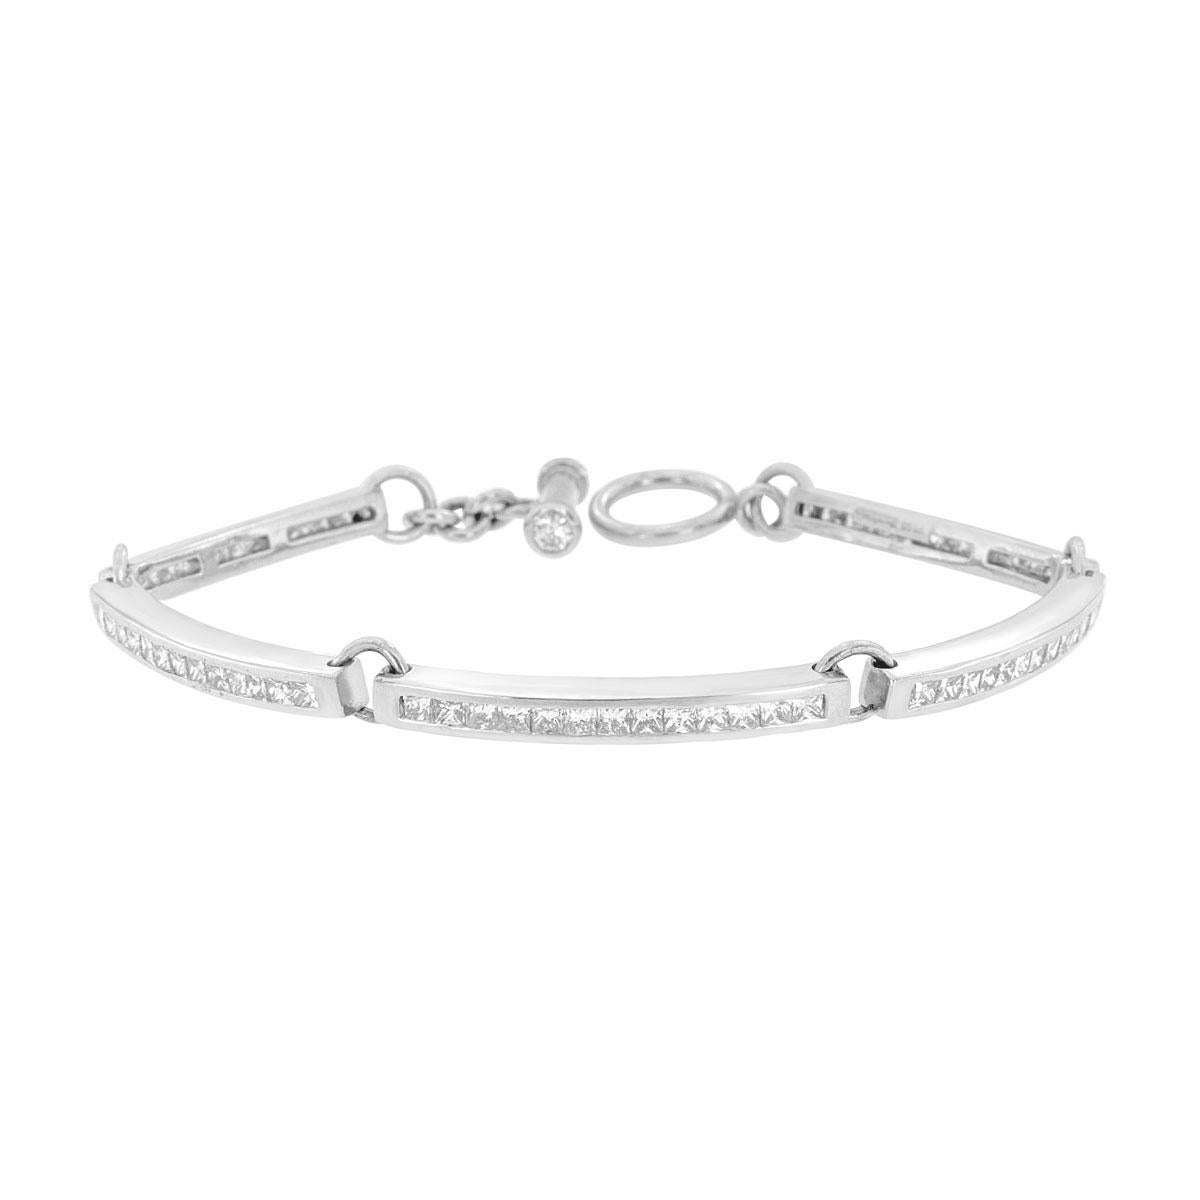 From our exclusive Gioia collection, this handcrafted bracelet showcase 65 perfectly matched Princess Shape diamonds channel set in Platinum. Two round diamonds are set into the Toggle clasp to create a divine unity between the diamonds and the